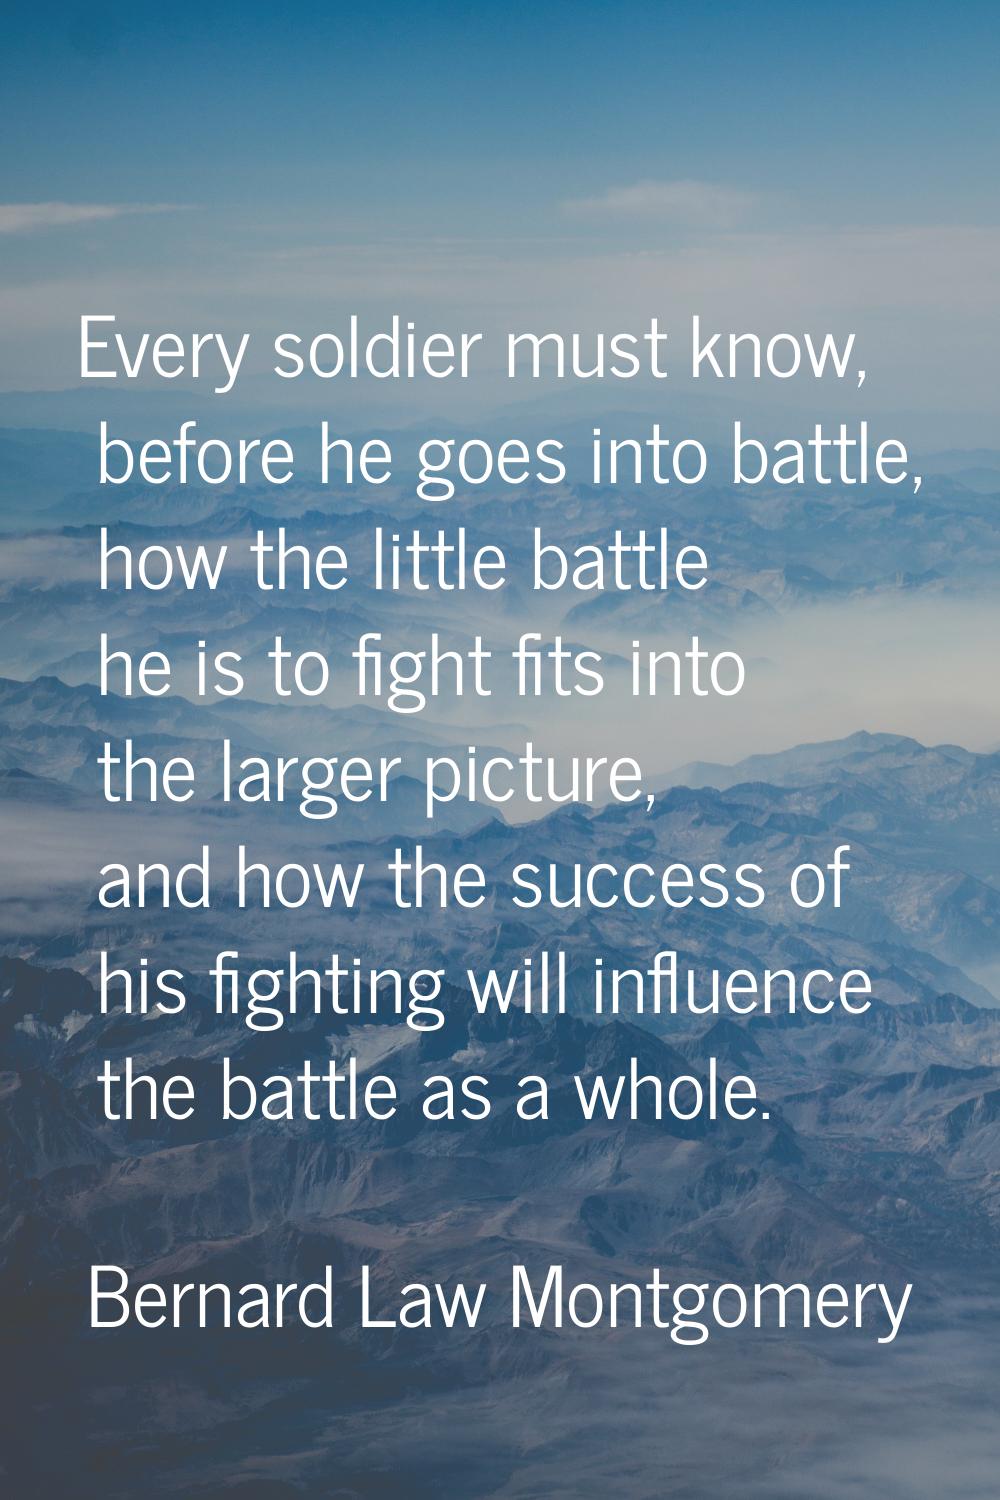 Every soldier must know, before he goes into battle, how the little battle he is to fight fits into